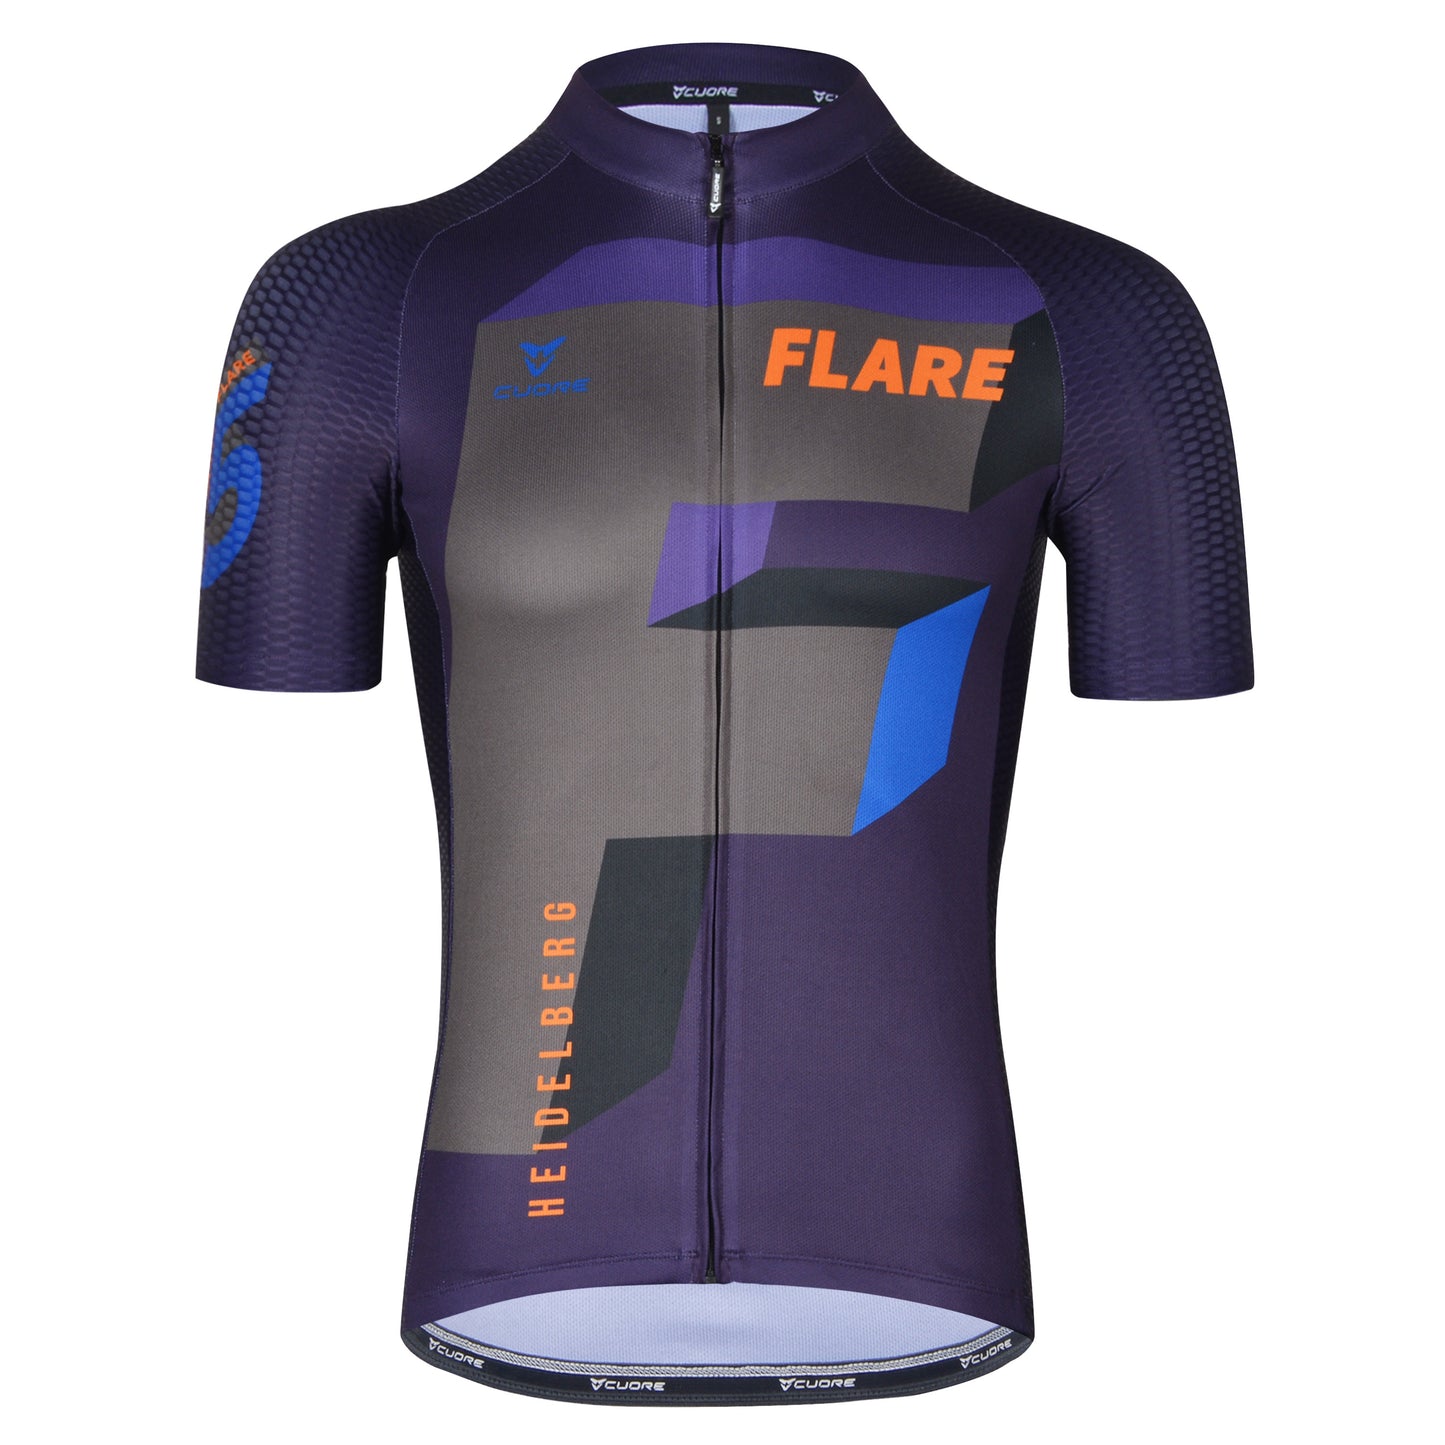 Men's Flare Jersey 23 – 5 Years